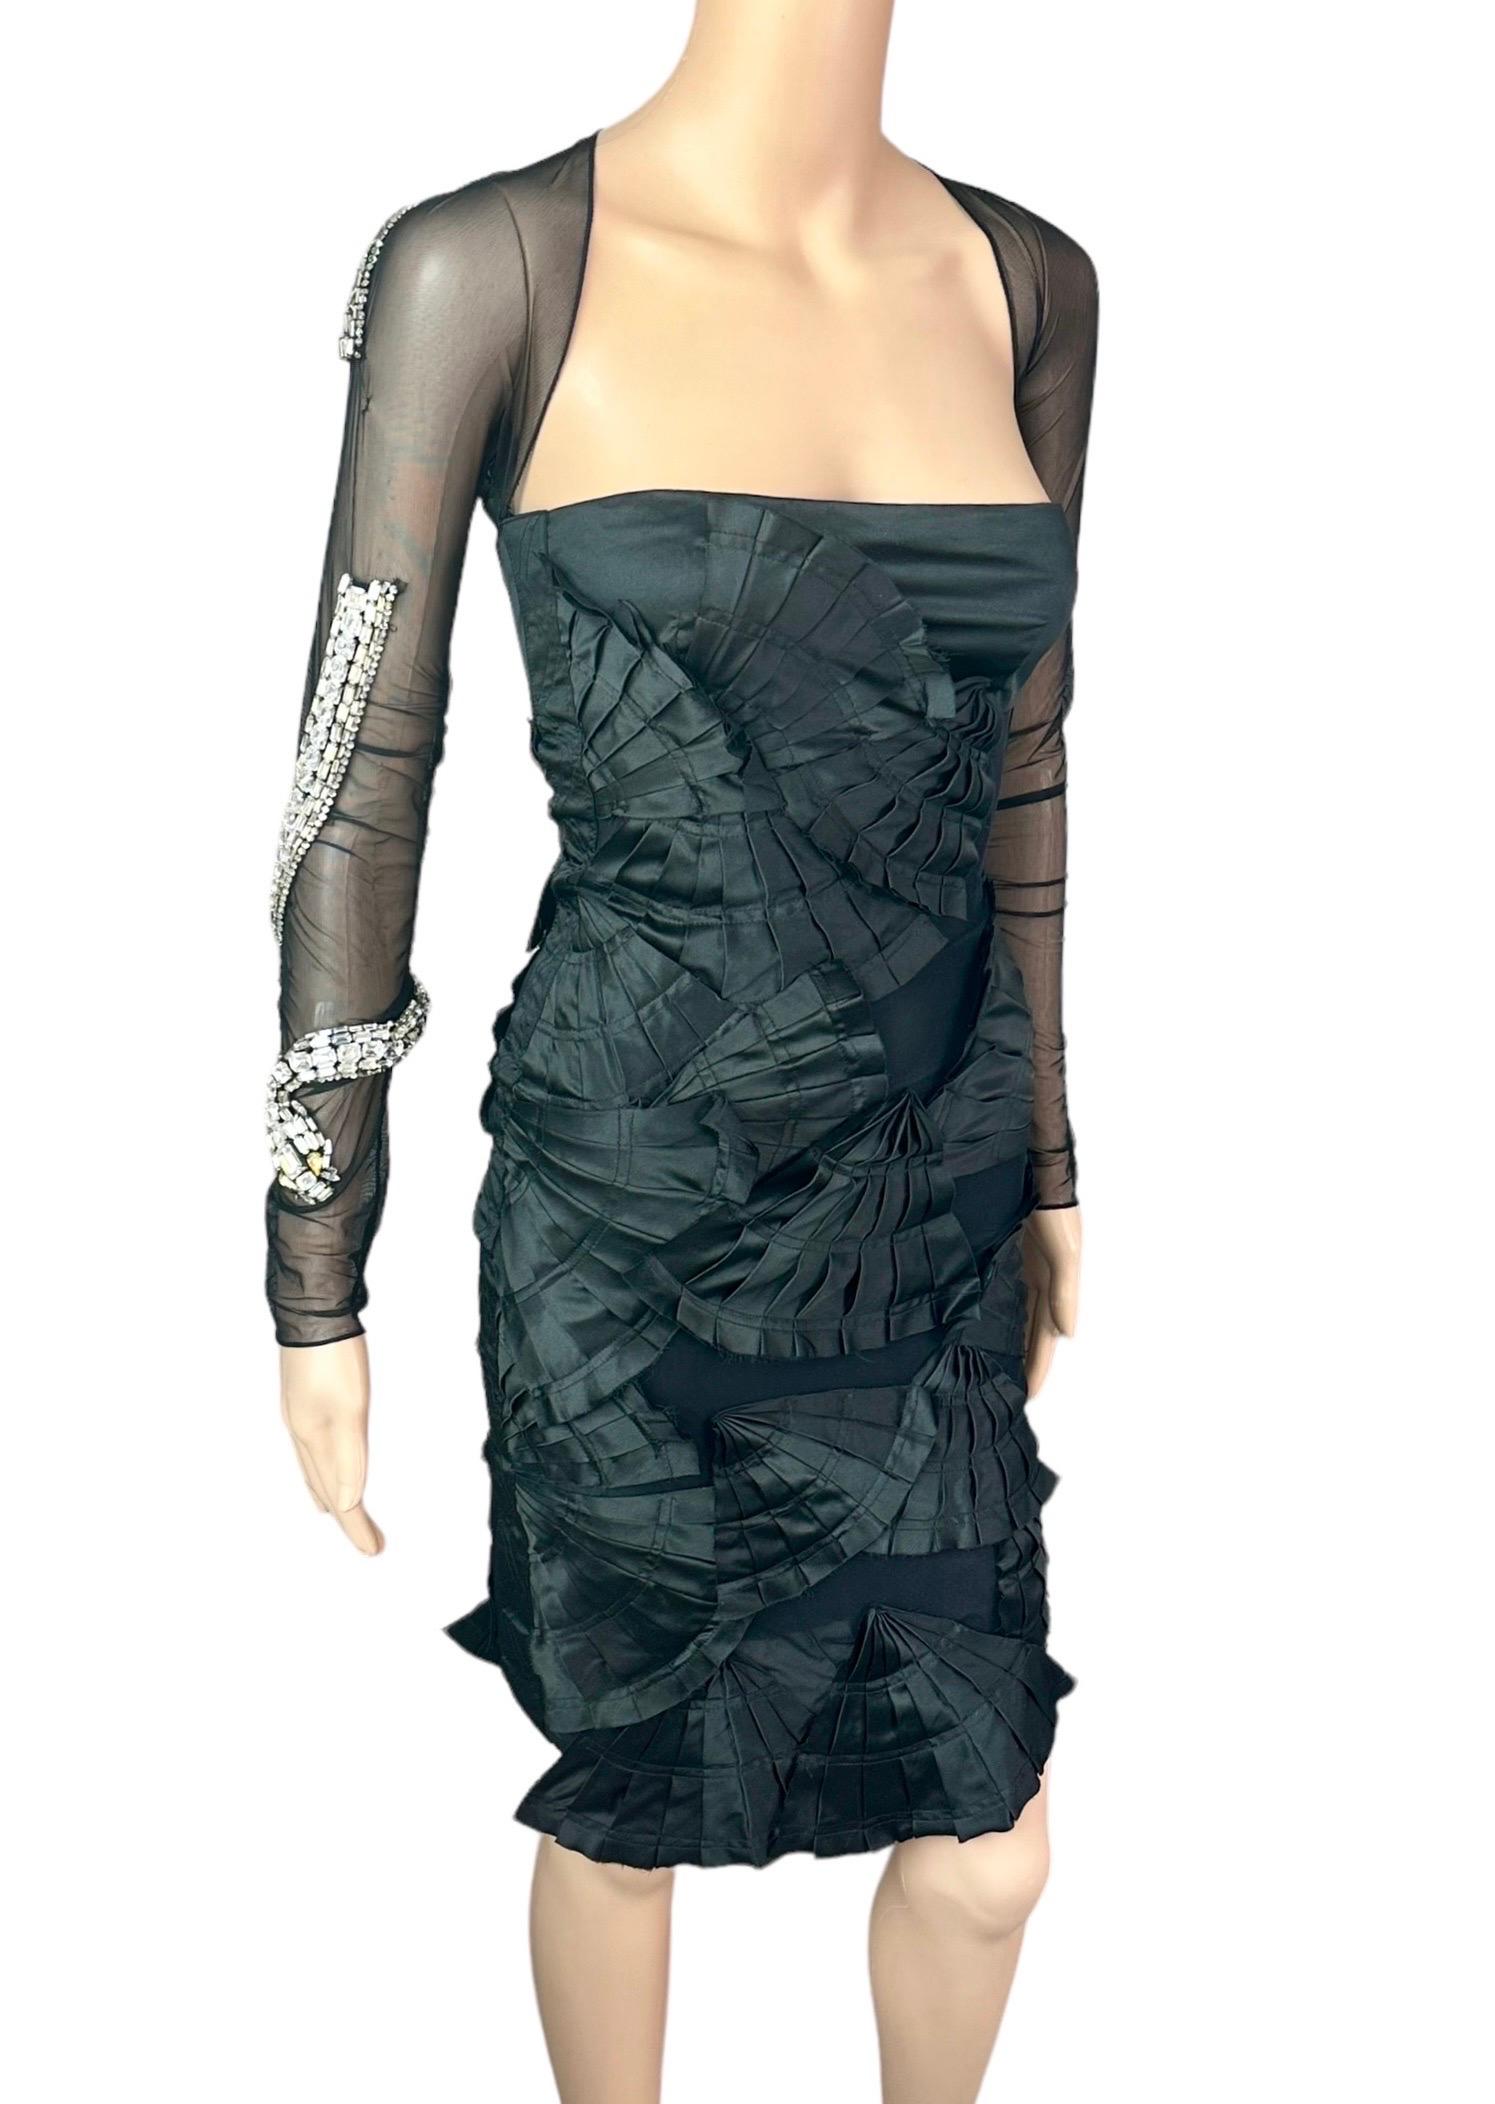 Tom Ford for Gucci S/S 2004 Runway Embellished Snake Sheer Cutout Black Dress For Sale 1